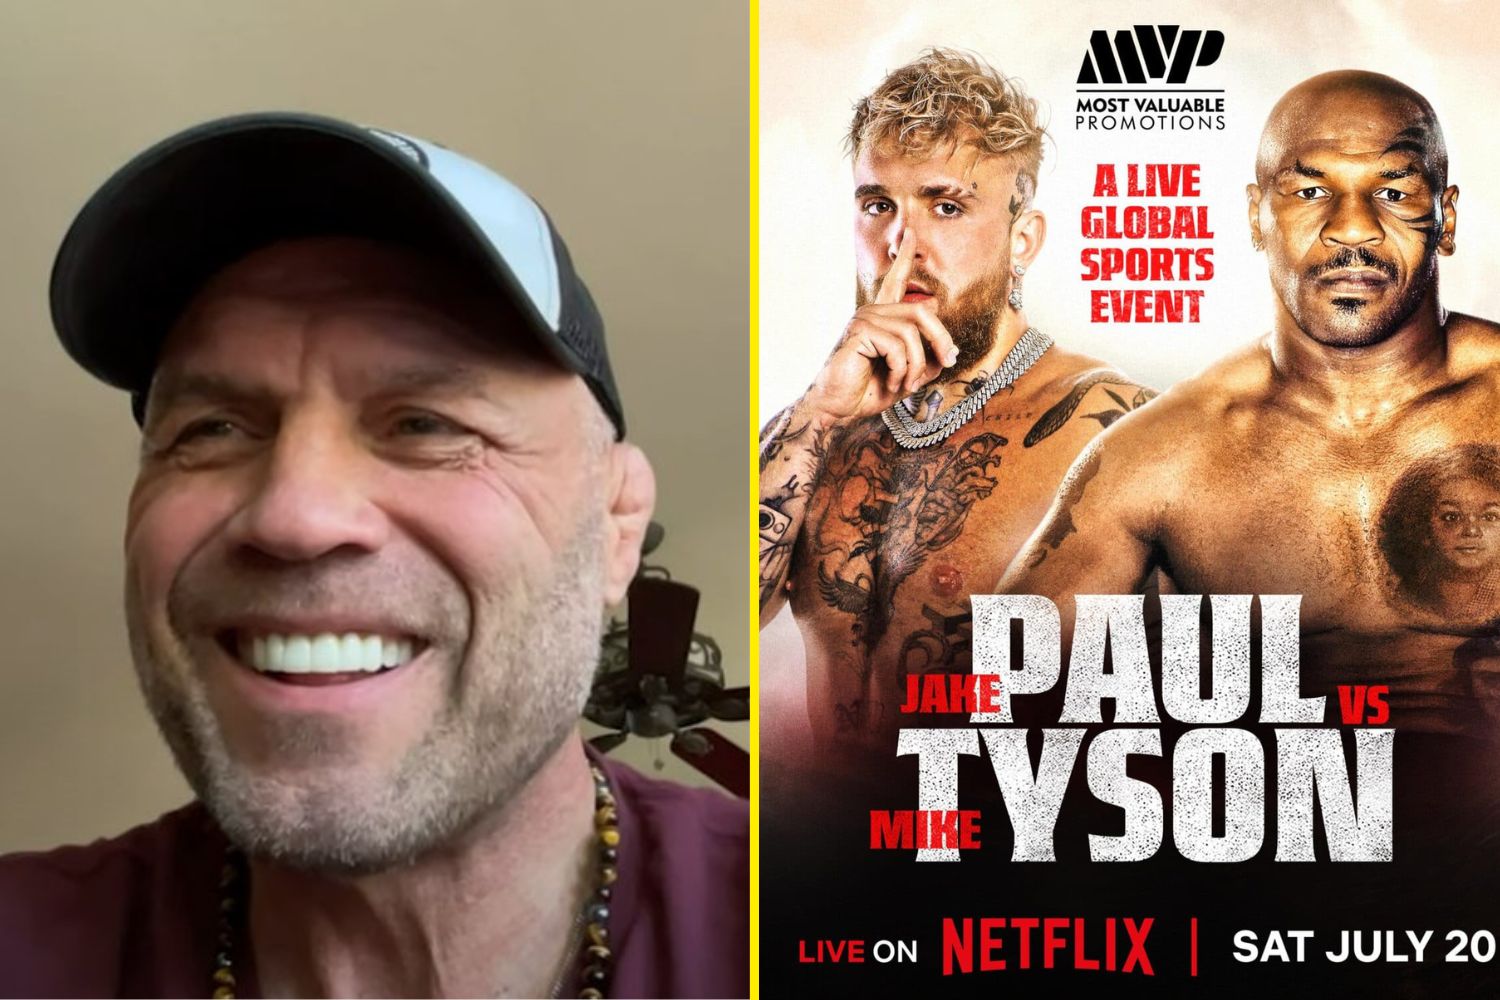 Mike Tyson's 'scary' training footage convinces UFC legend Randy Couture that Jake Paul is in trouble